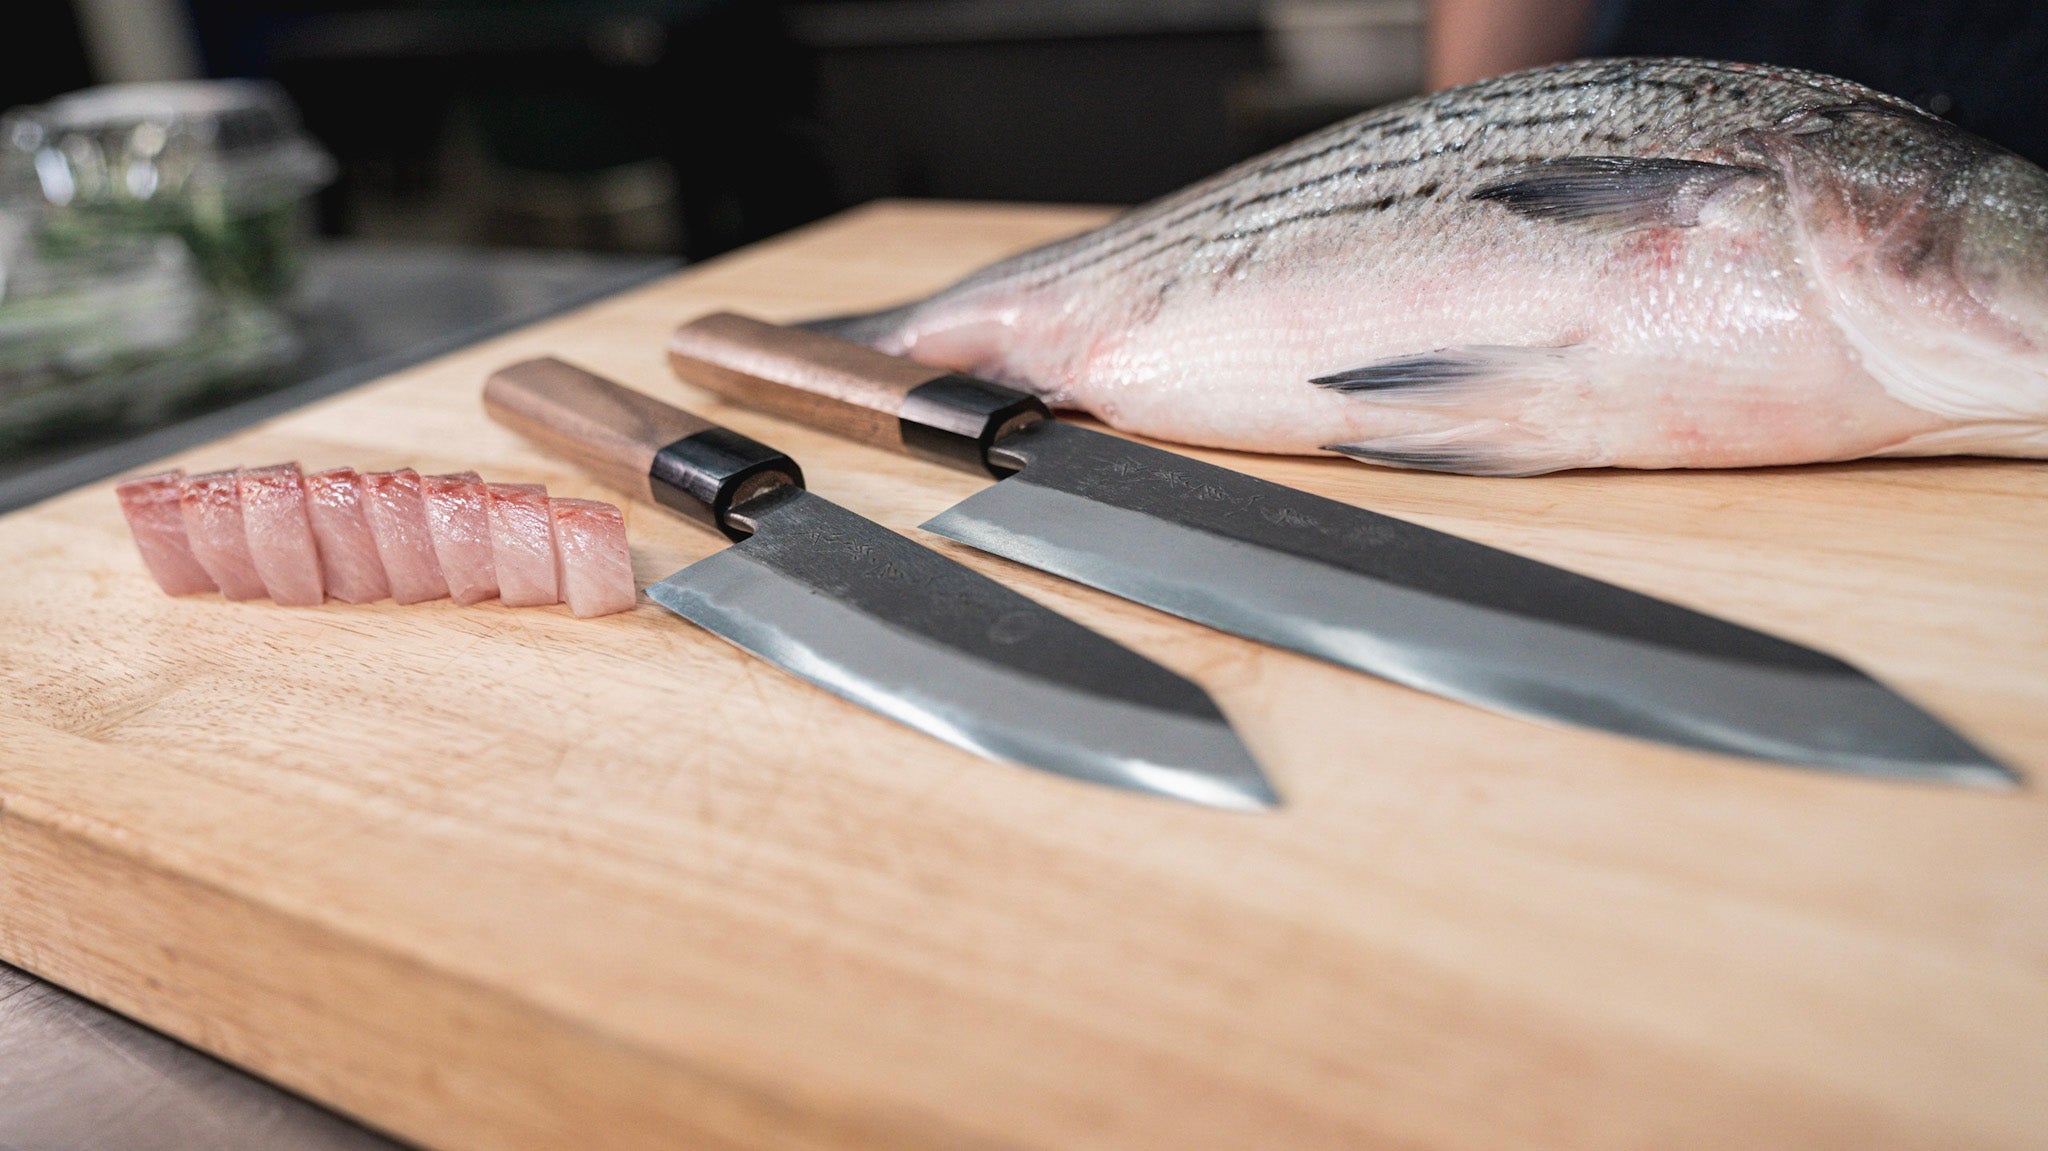 Two Knives On A Cutting Board Next To Fish